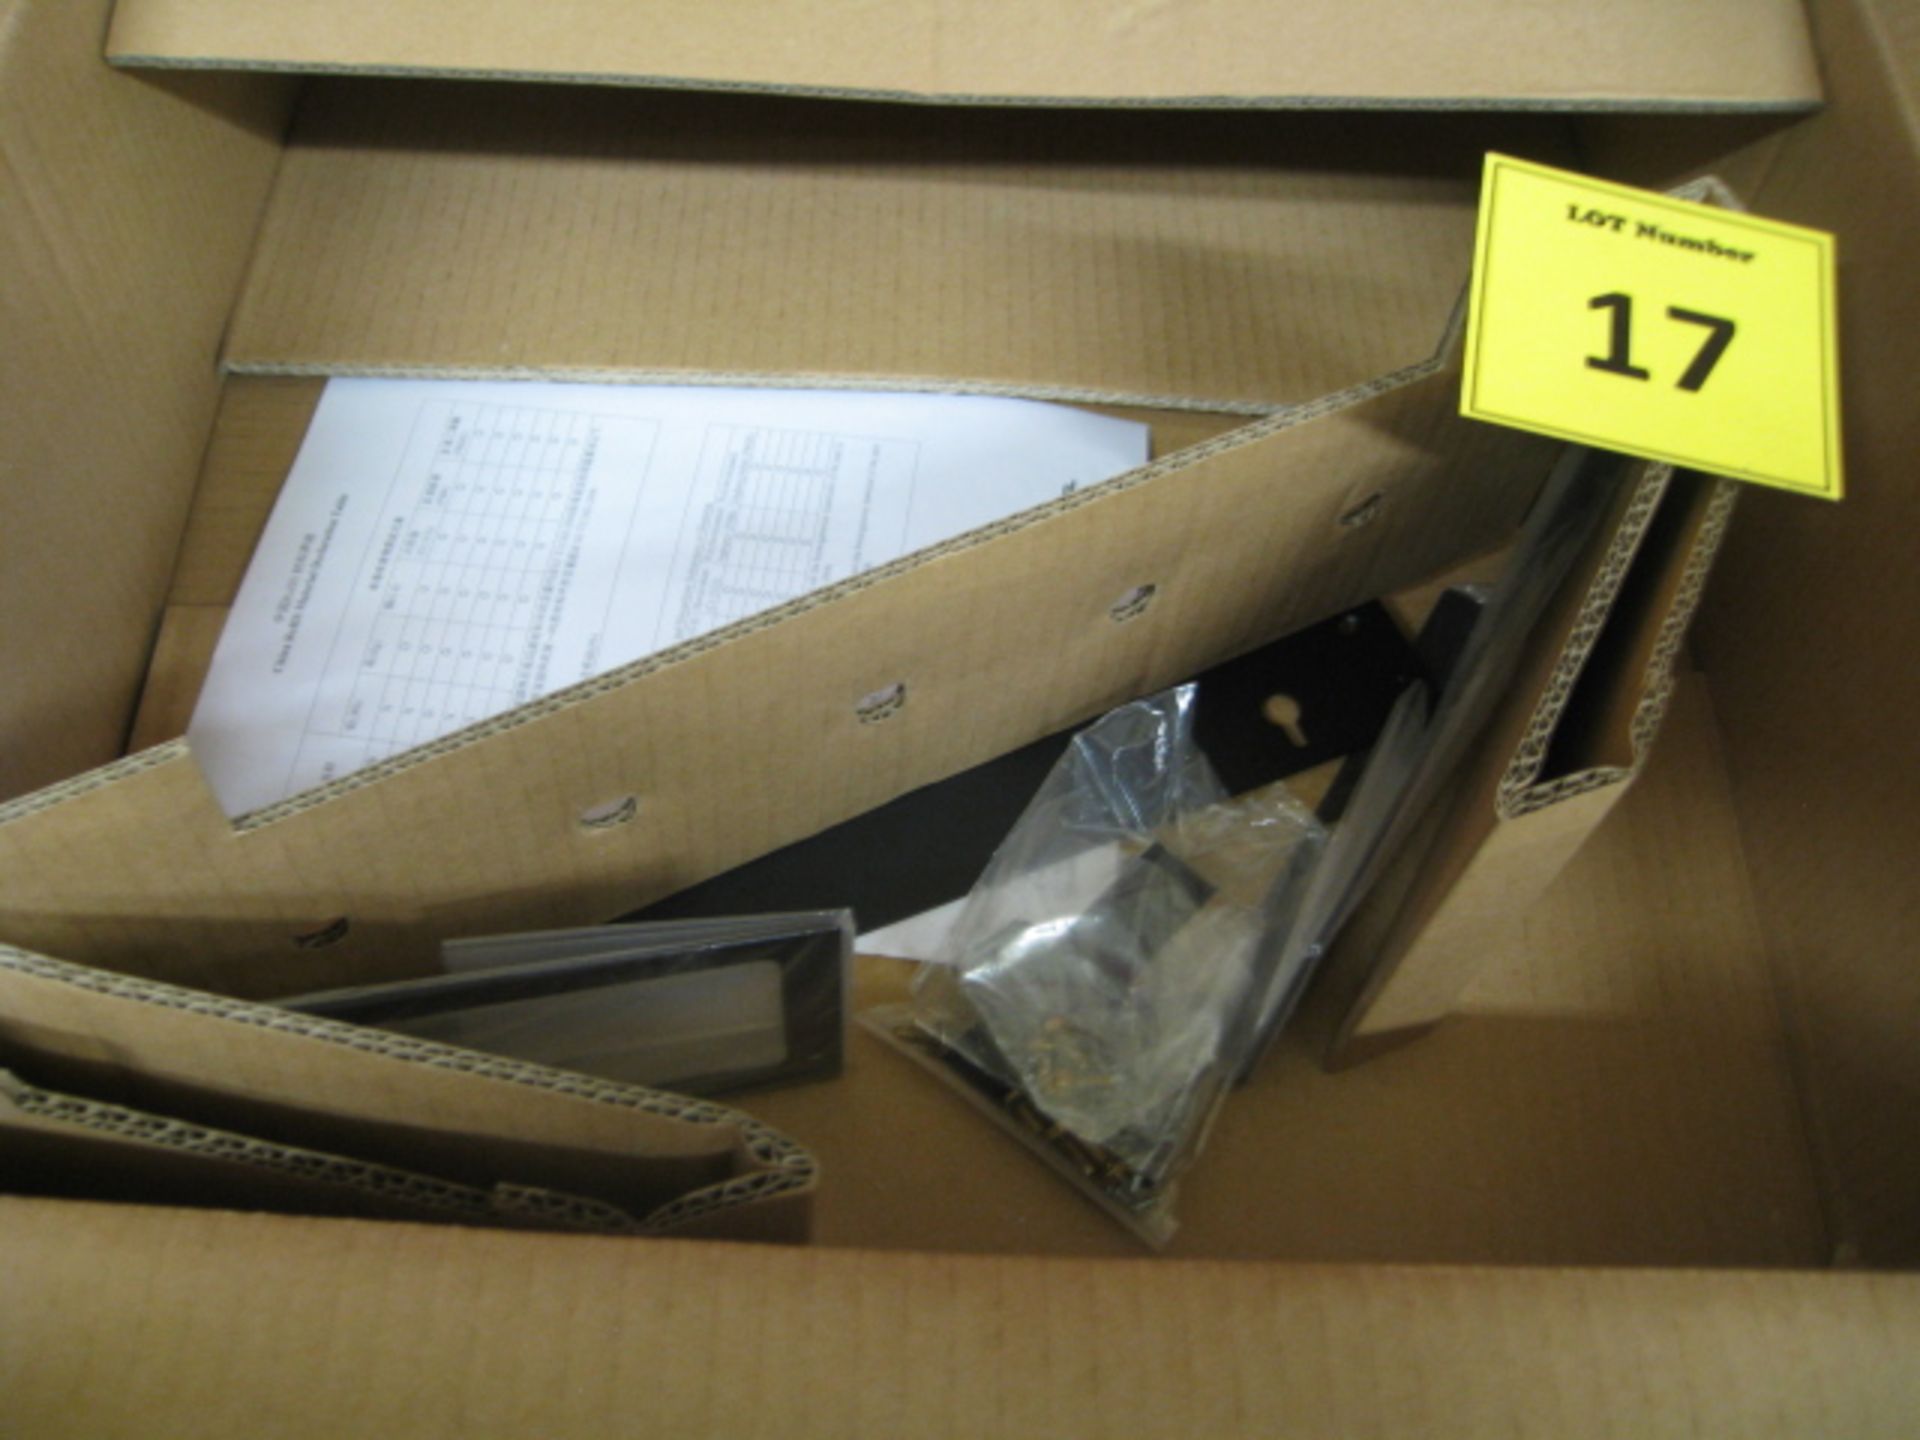 Mitel 3300 CXi II Controller. BOXED WITH SAFETY INSTRUCTIONS - Image 6 of 7